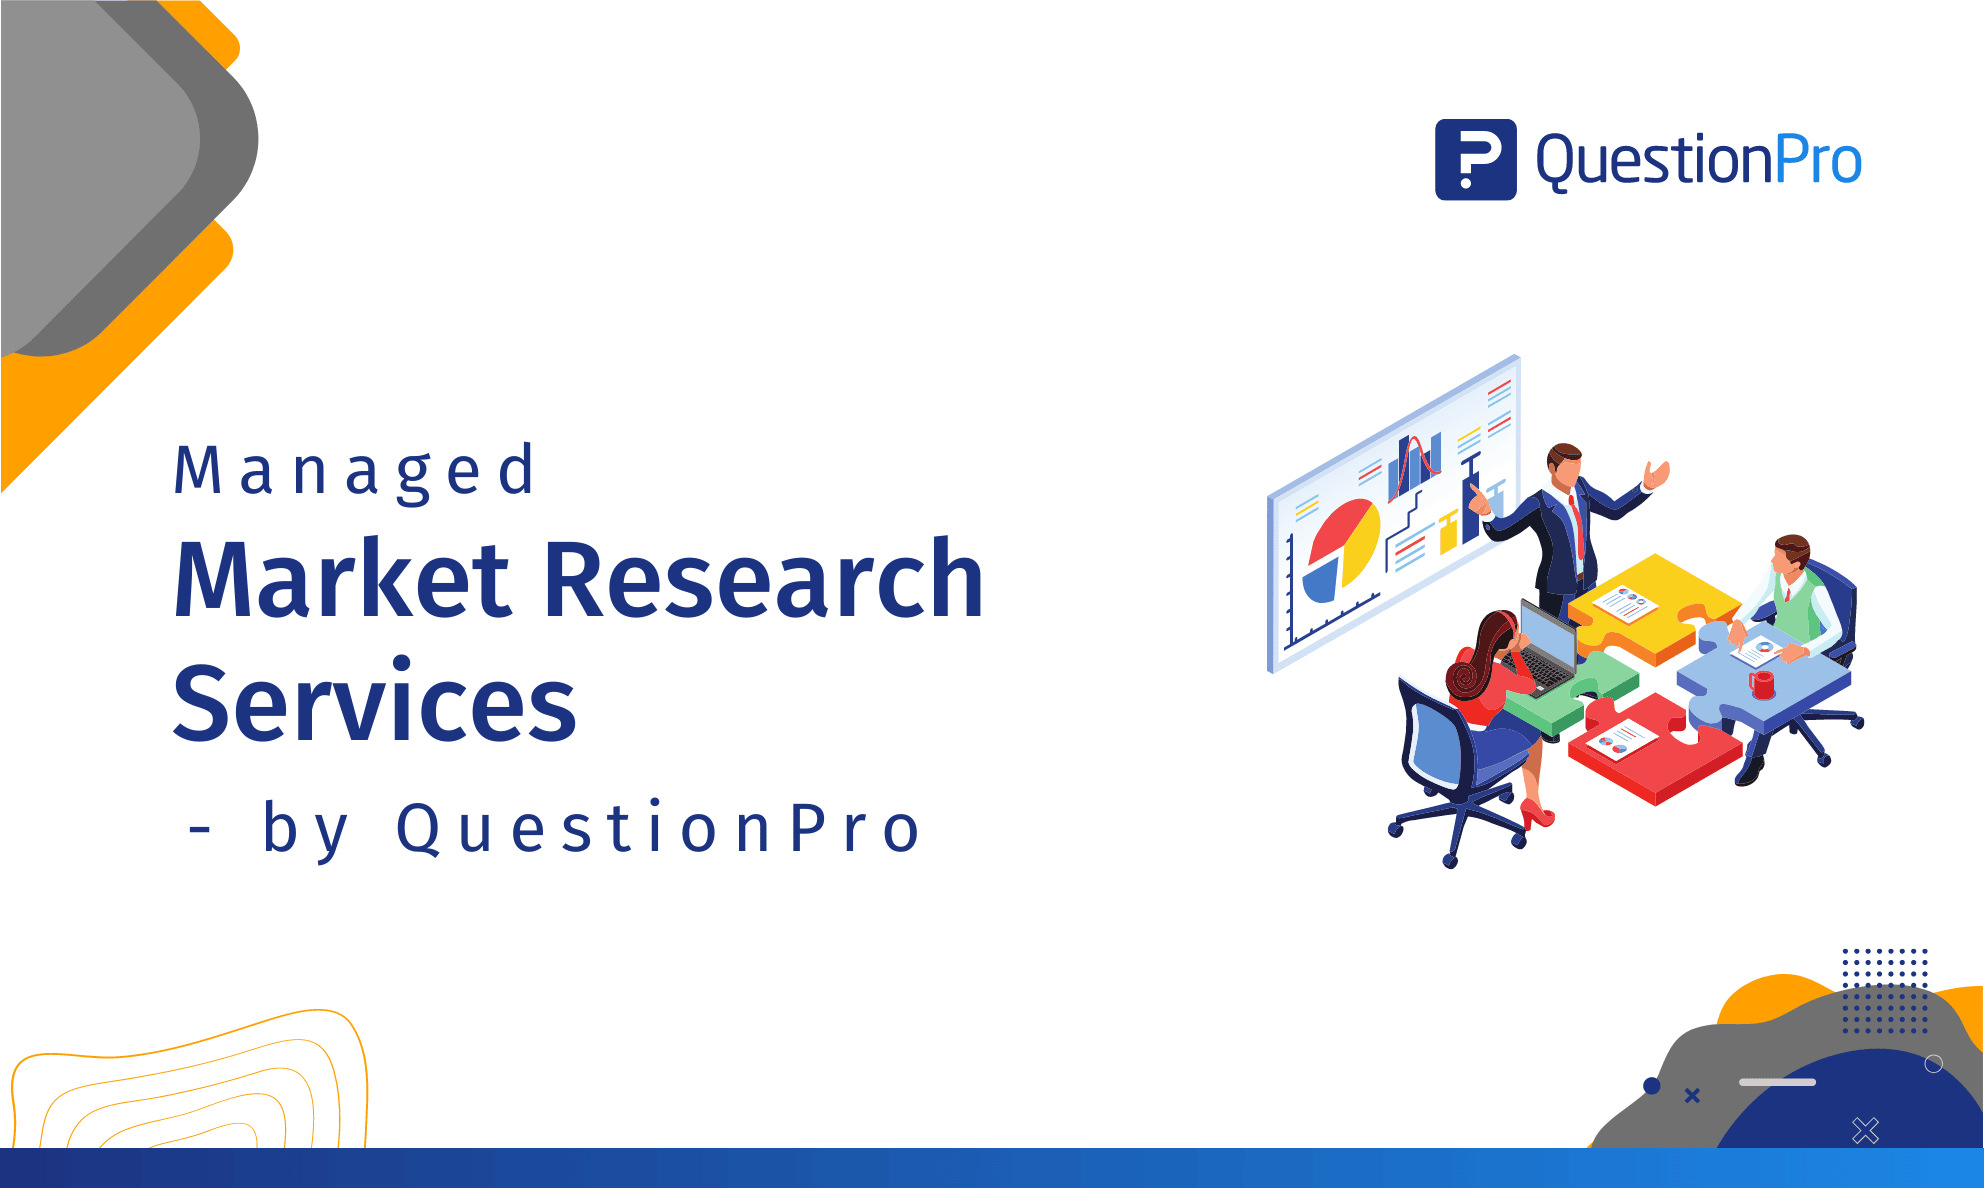 QuestionPro’s research services team is ready to help